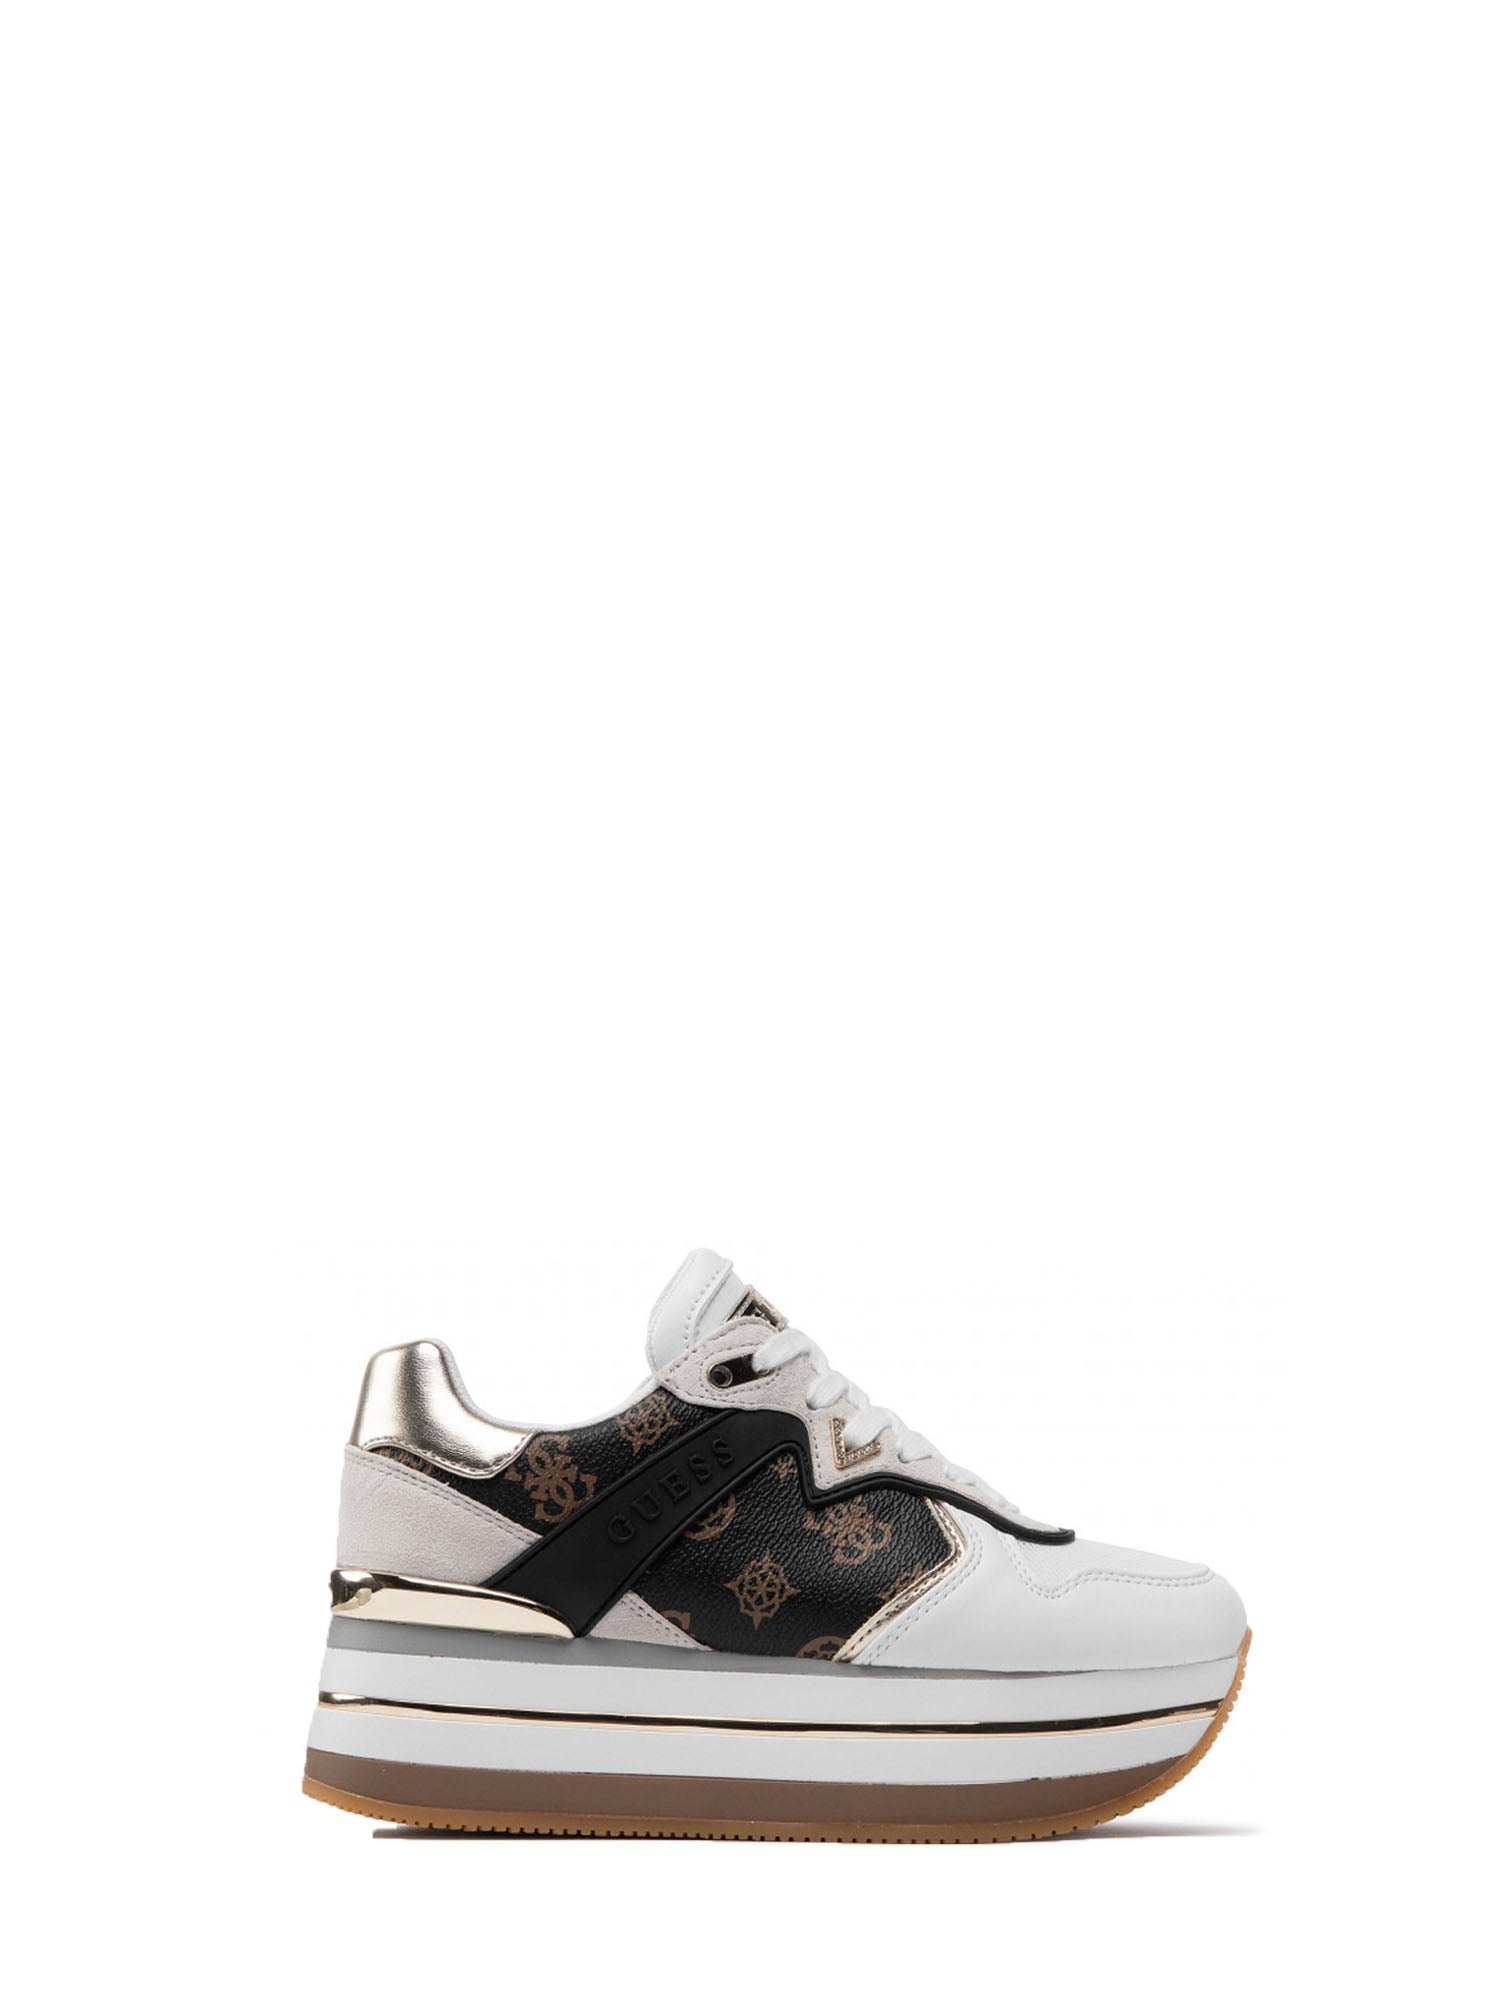 GUESS JEANS SNEAKERS HARINNA MARRONE - BIANCO